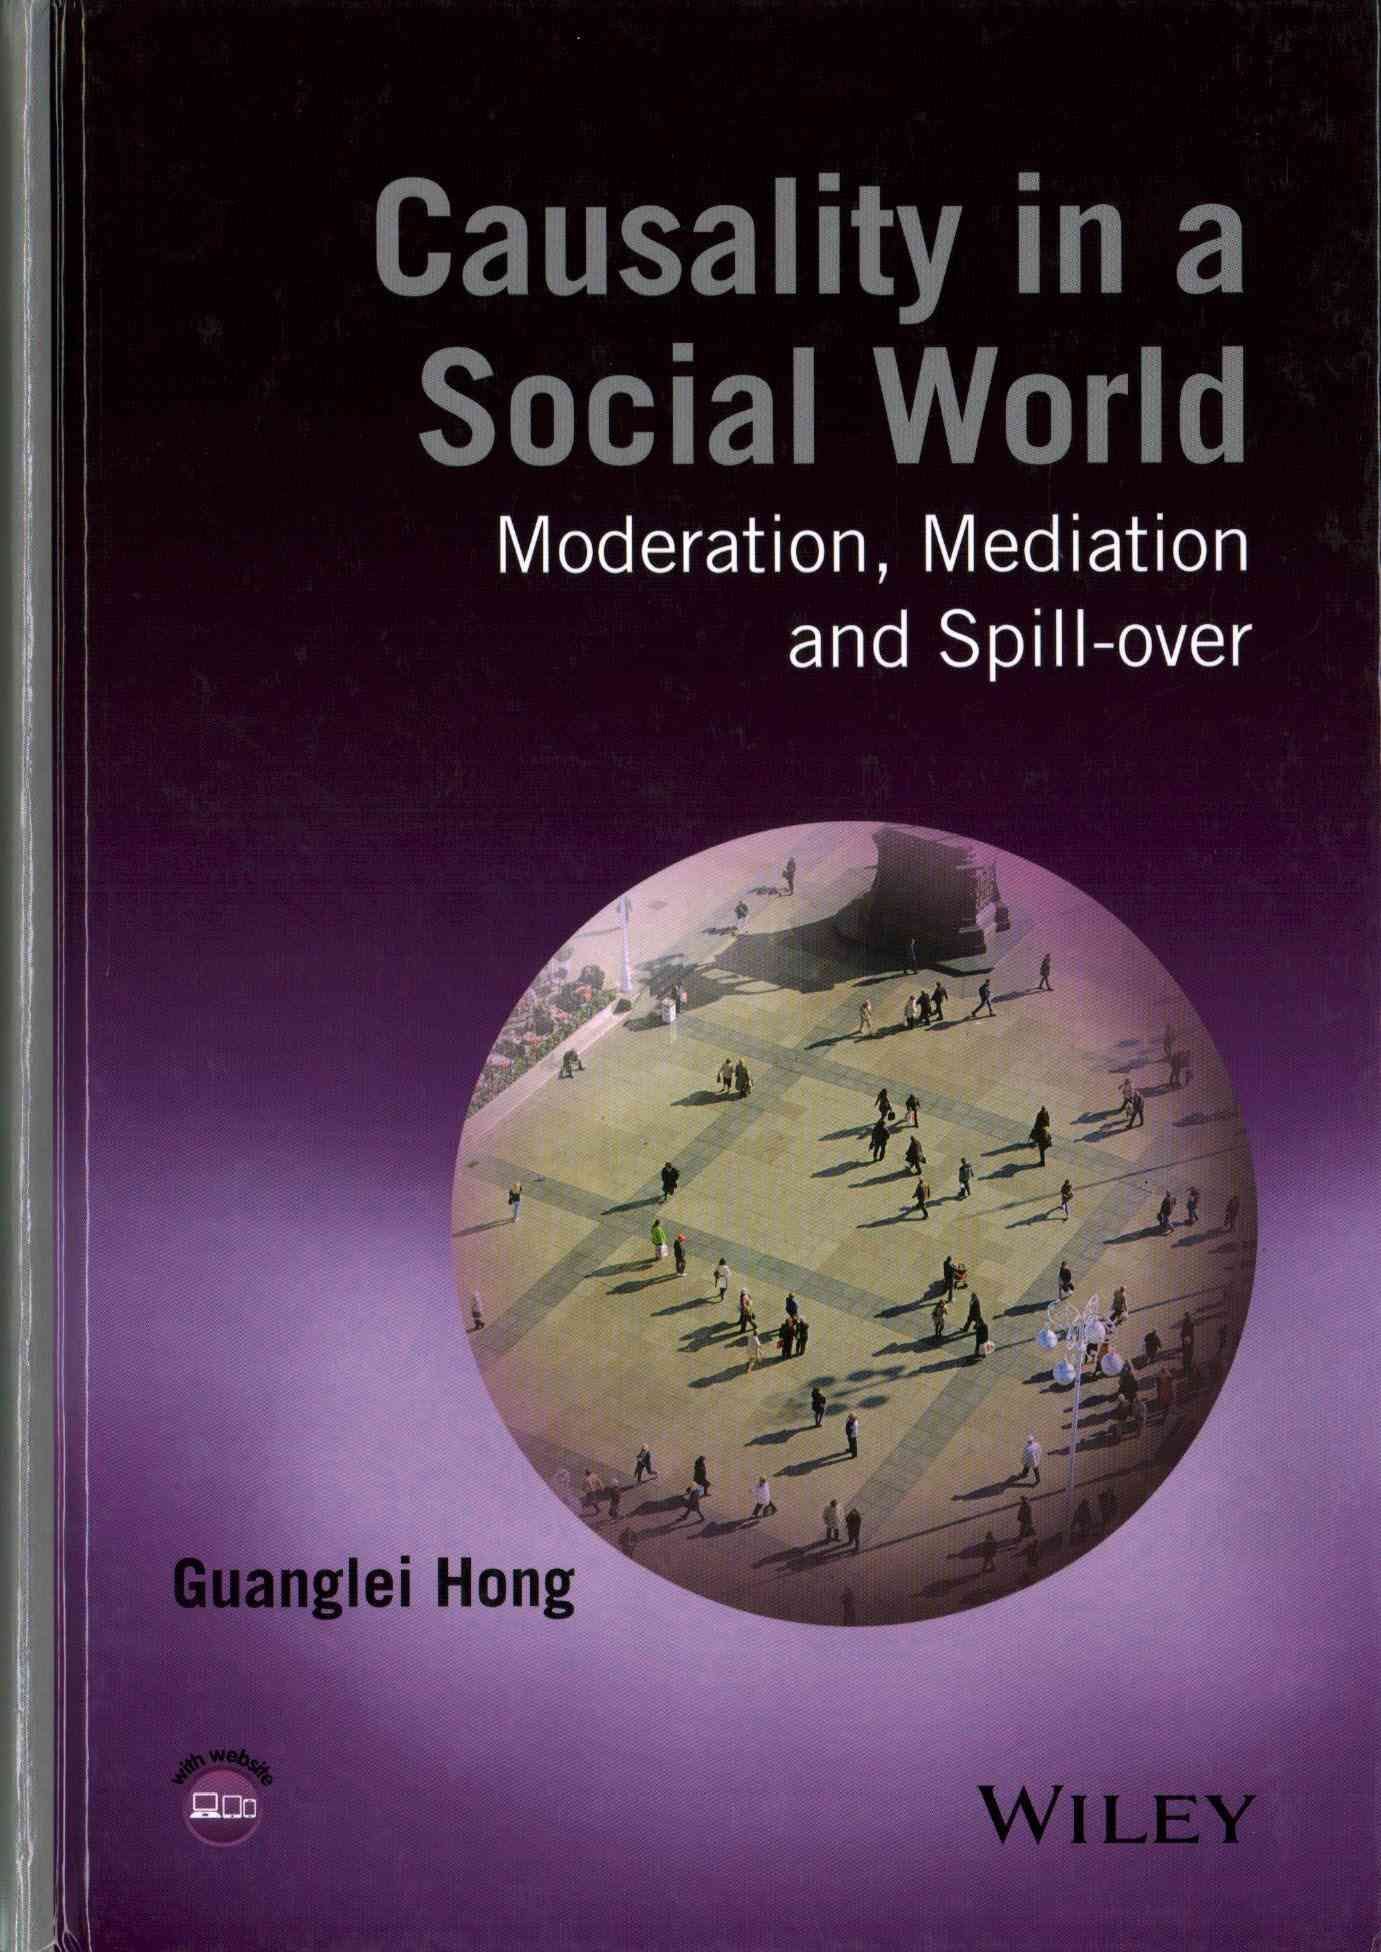 Causality in a Social World - Moderation, Mediation and Spill-over